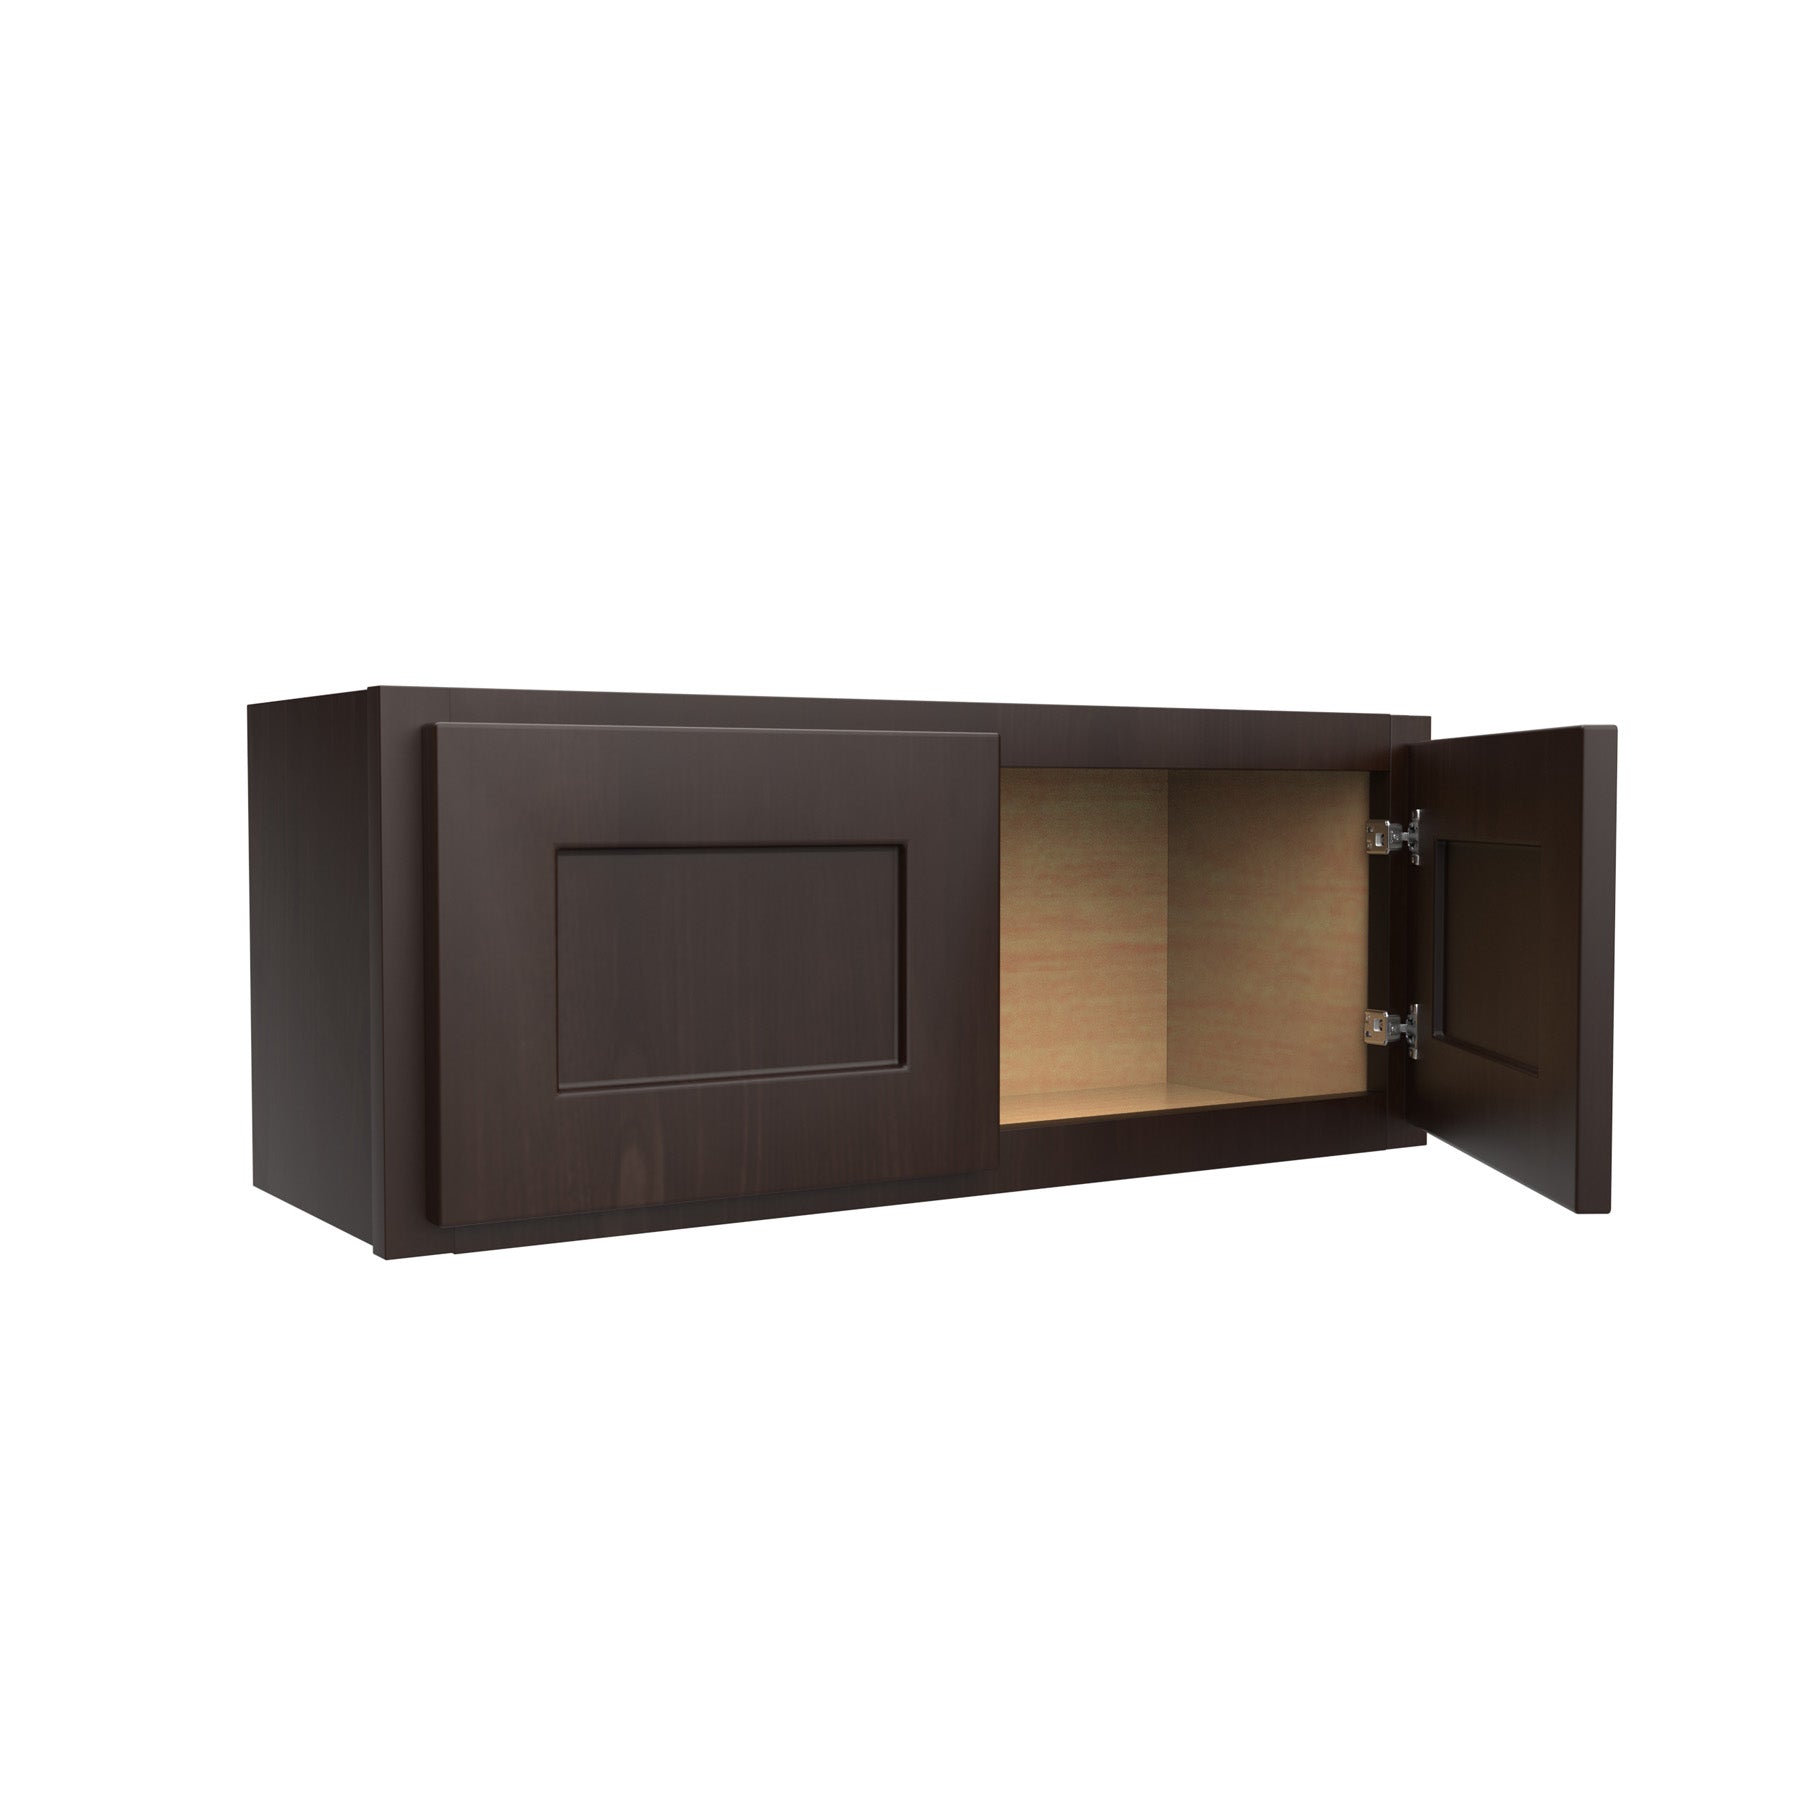 12 inch Wall Cabinet | 30"W x 12"H x 12"D